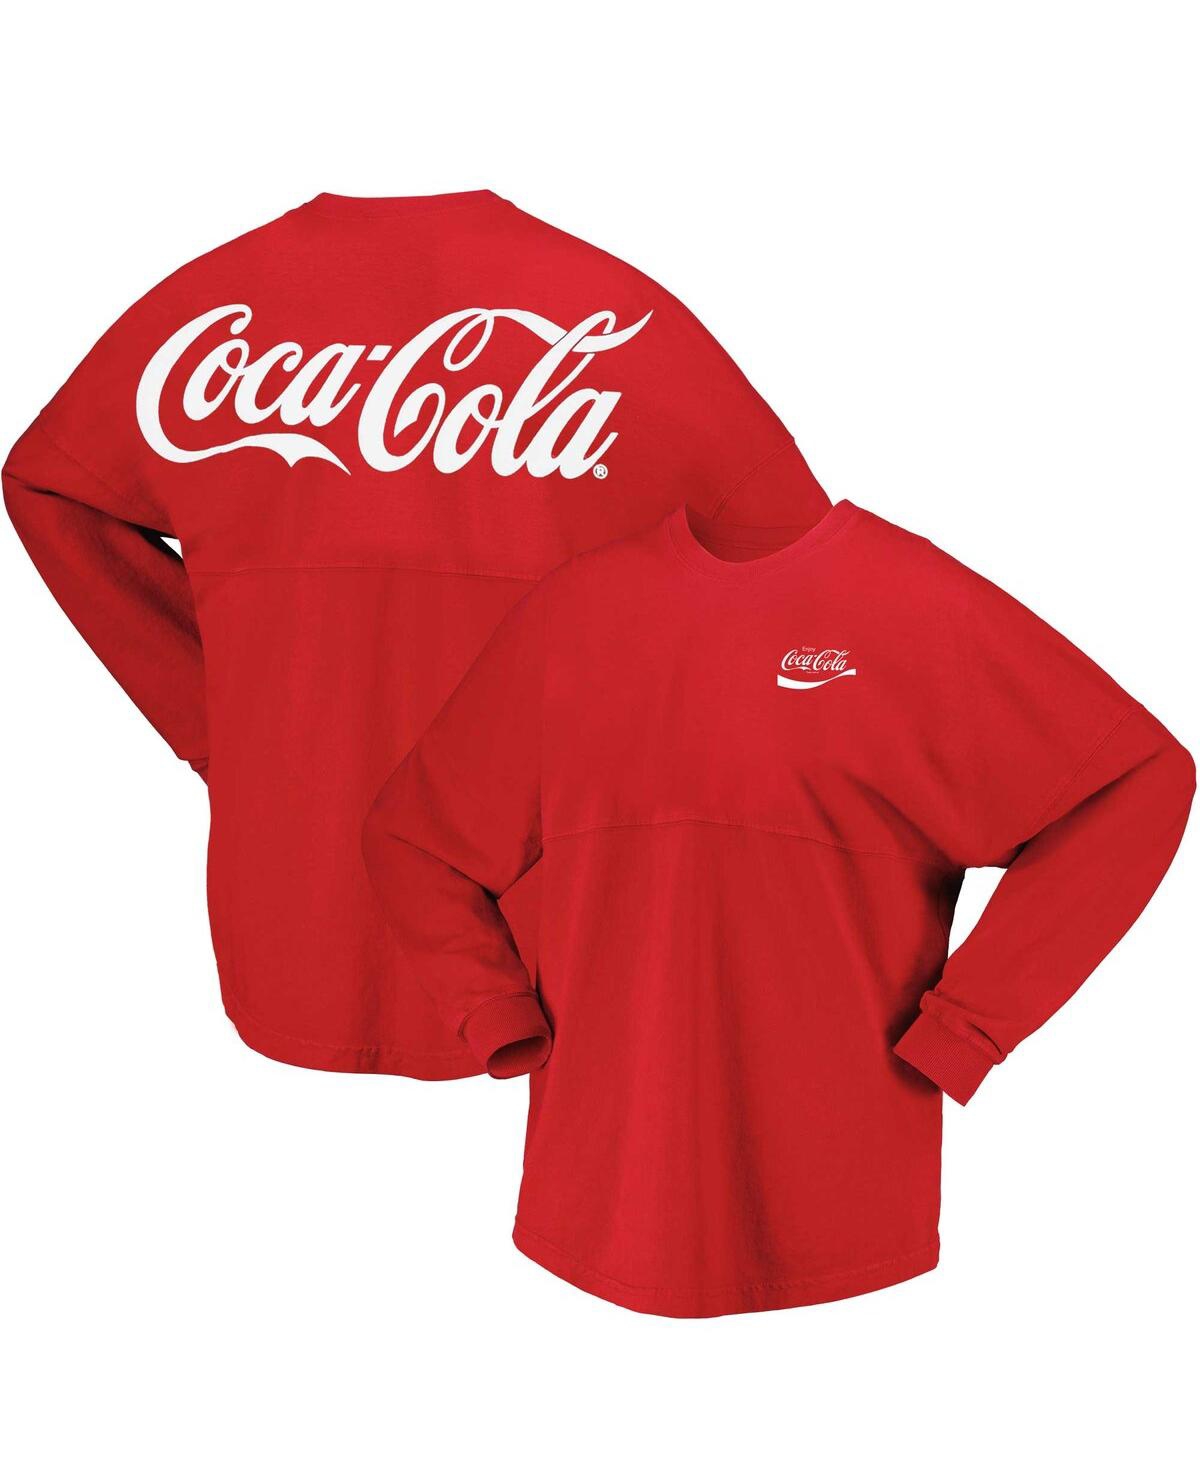 Men's and Women's Red Coca-Cola Long Sleeve T-shirt - Red